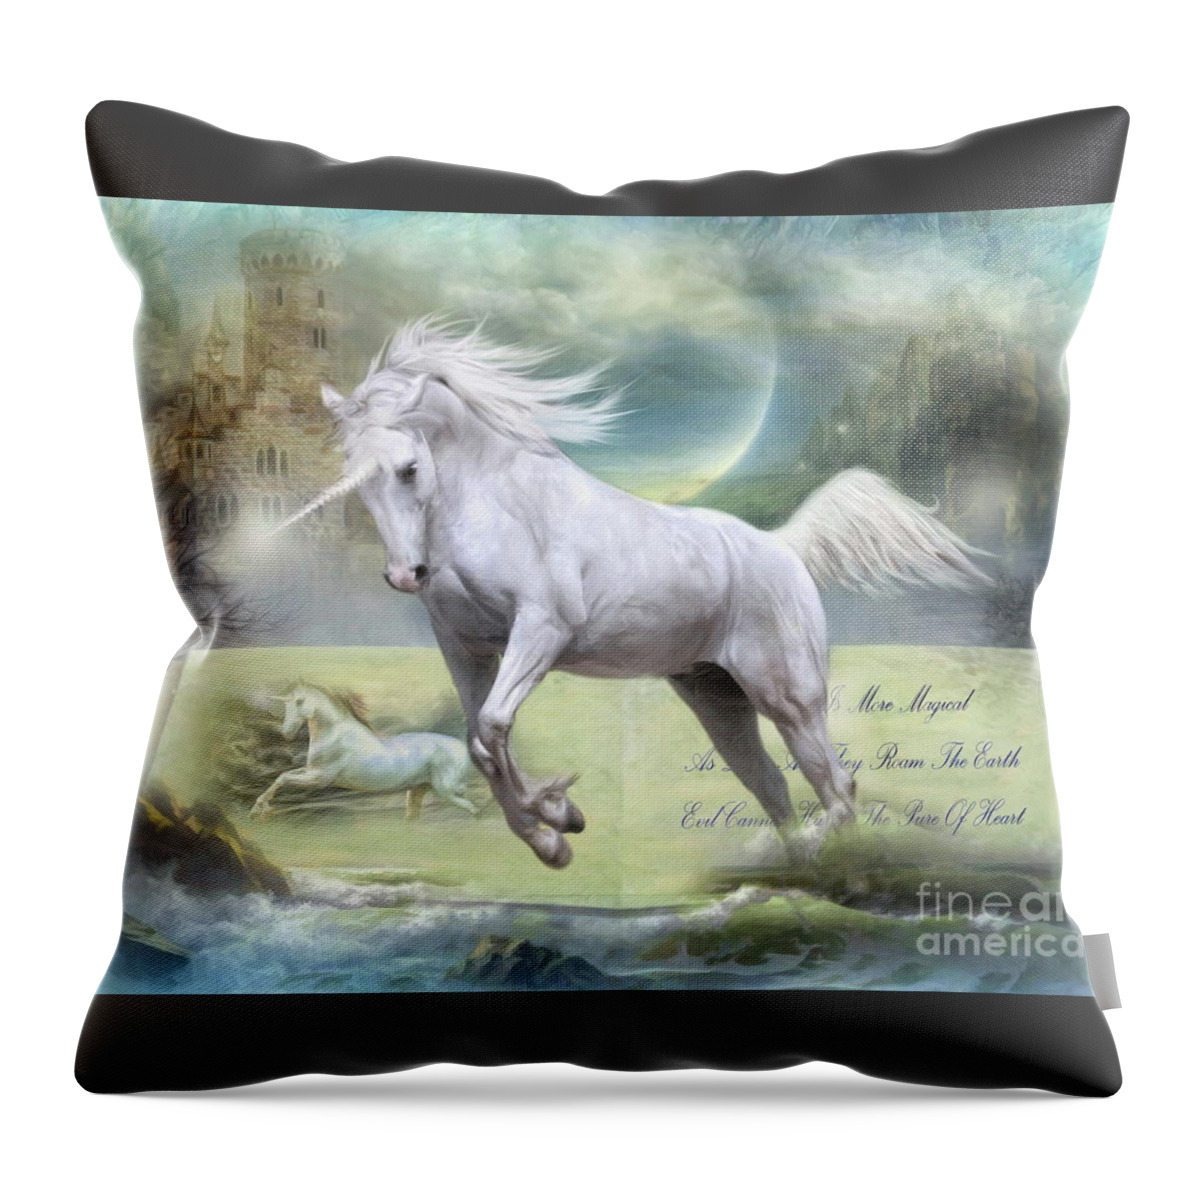 Unicorn Throw Pillow featuring the digital art Pure Of Heart by Trudi Simmonds